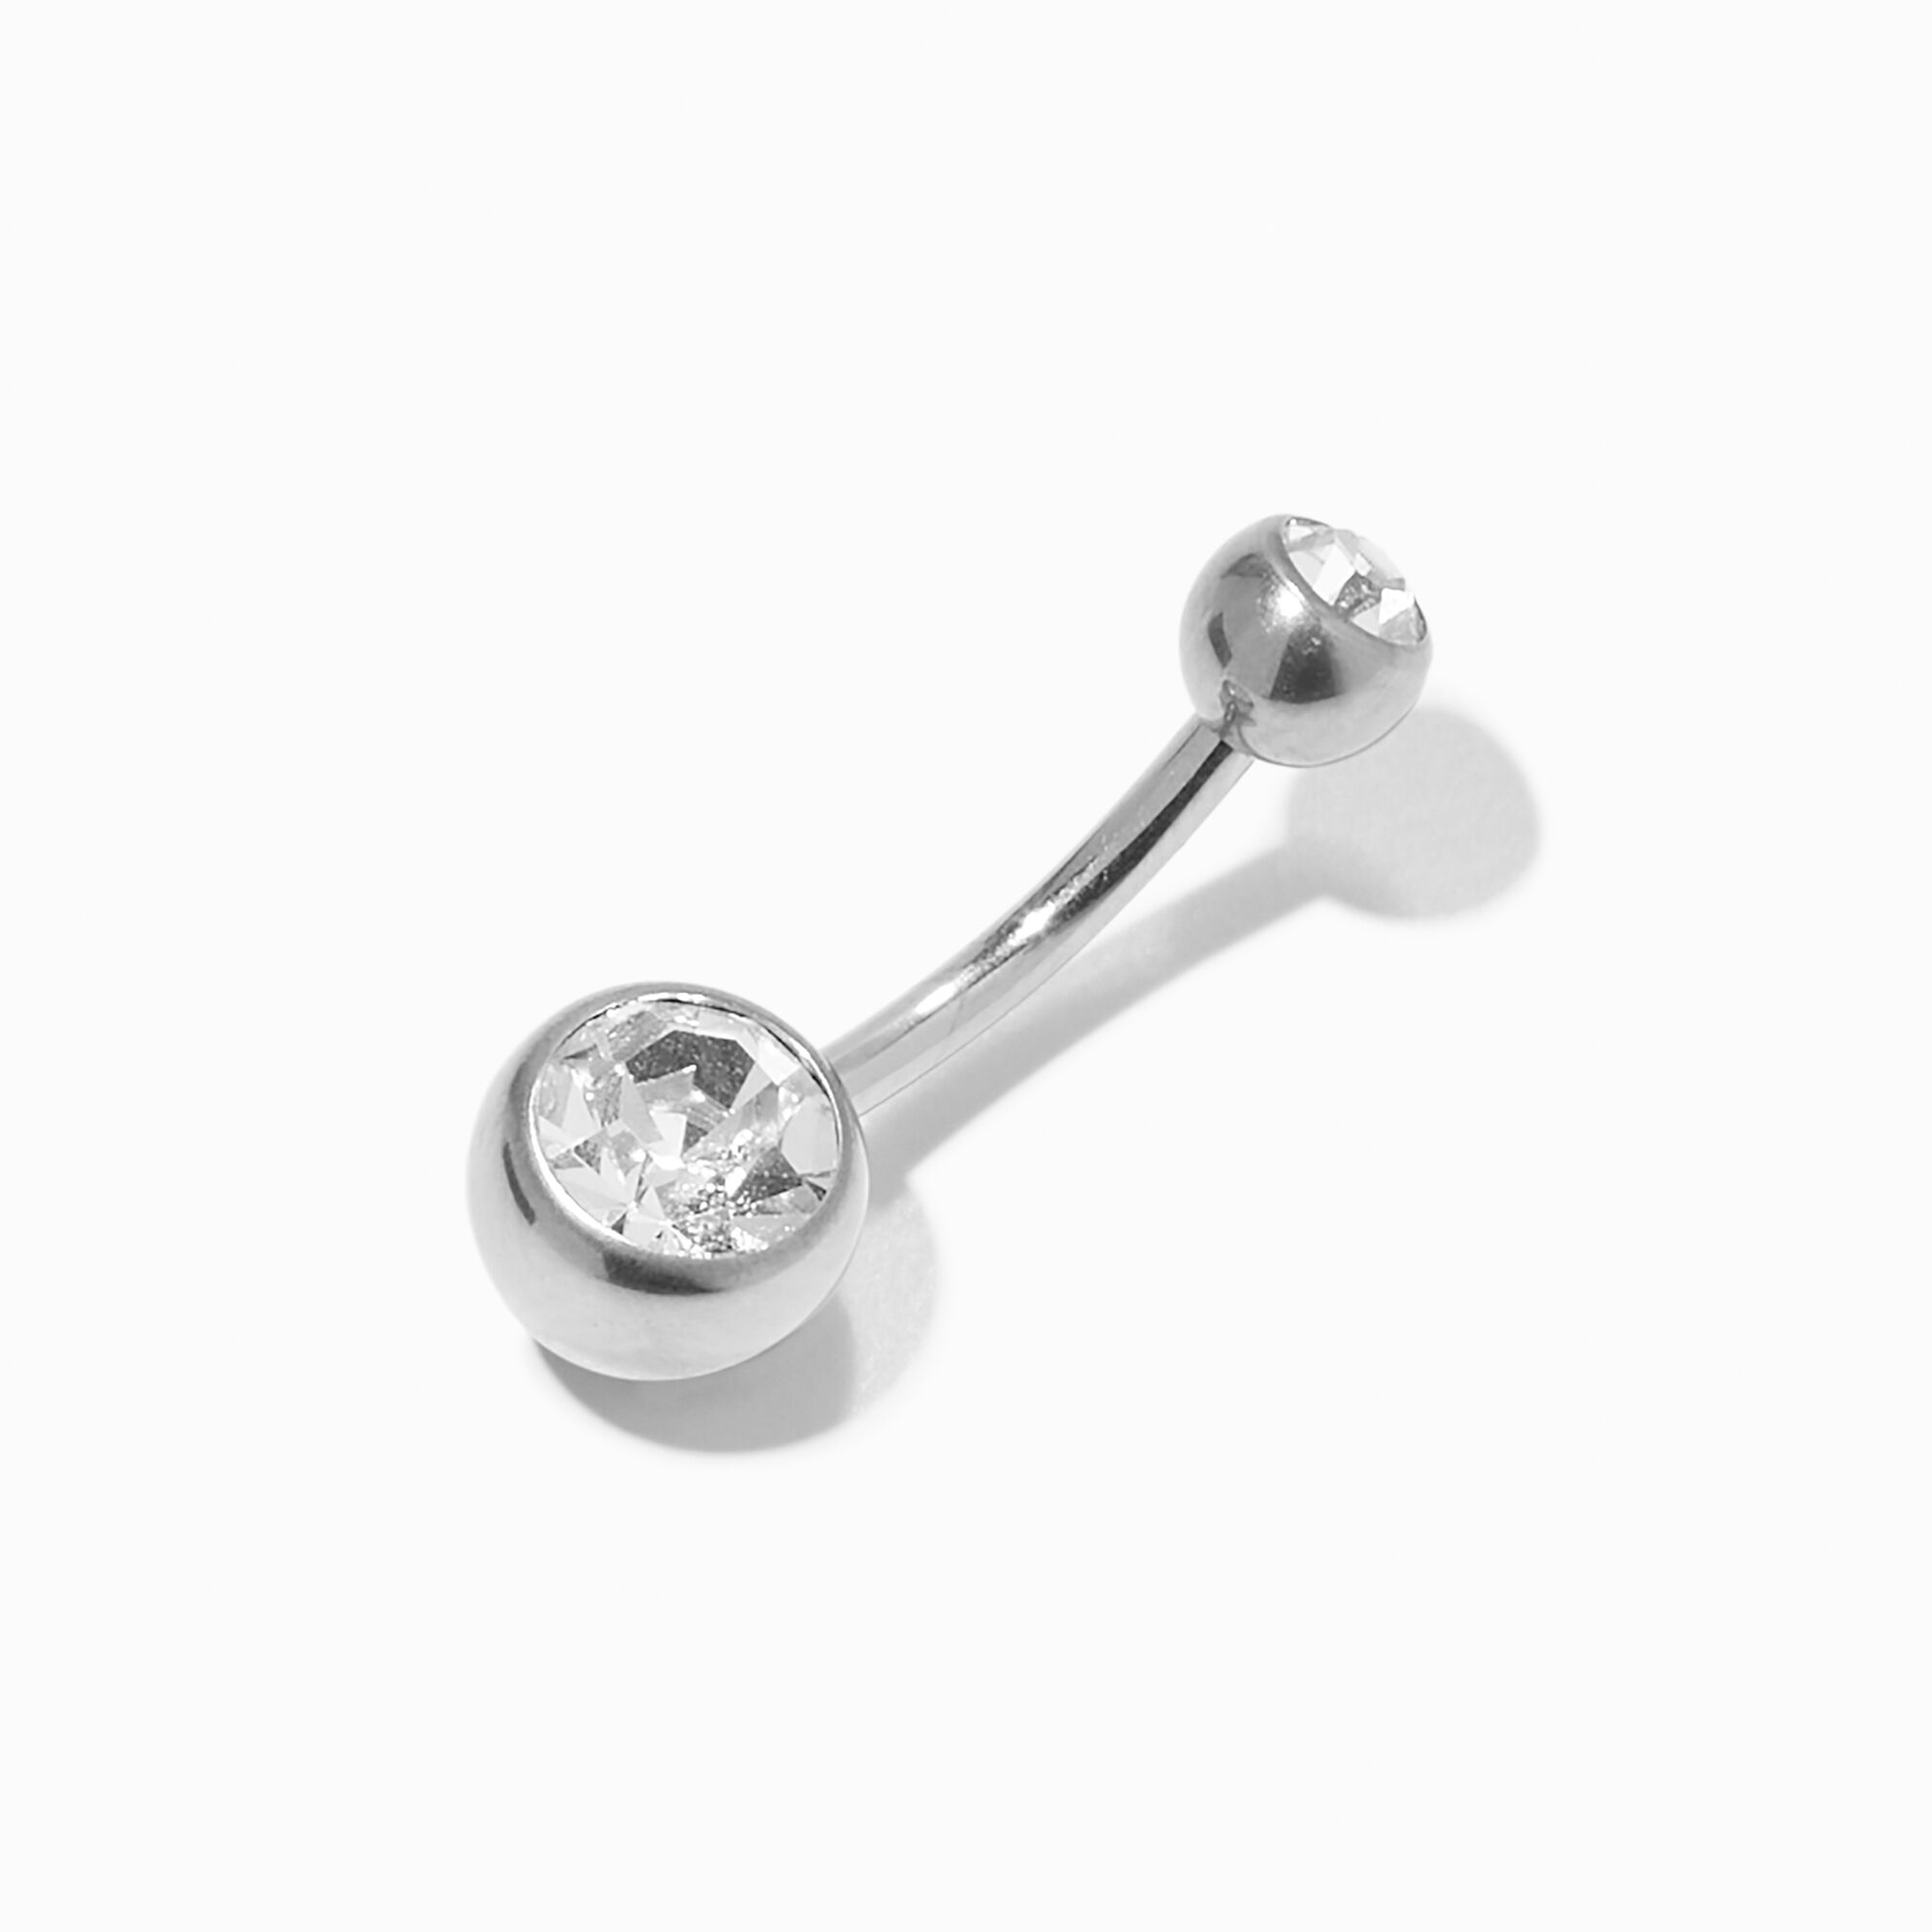 View Claires Titanium 14G Crystal Belly Ring Silver information